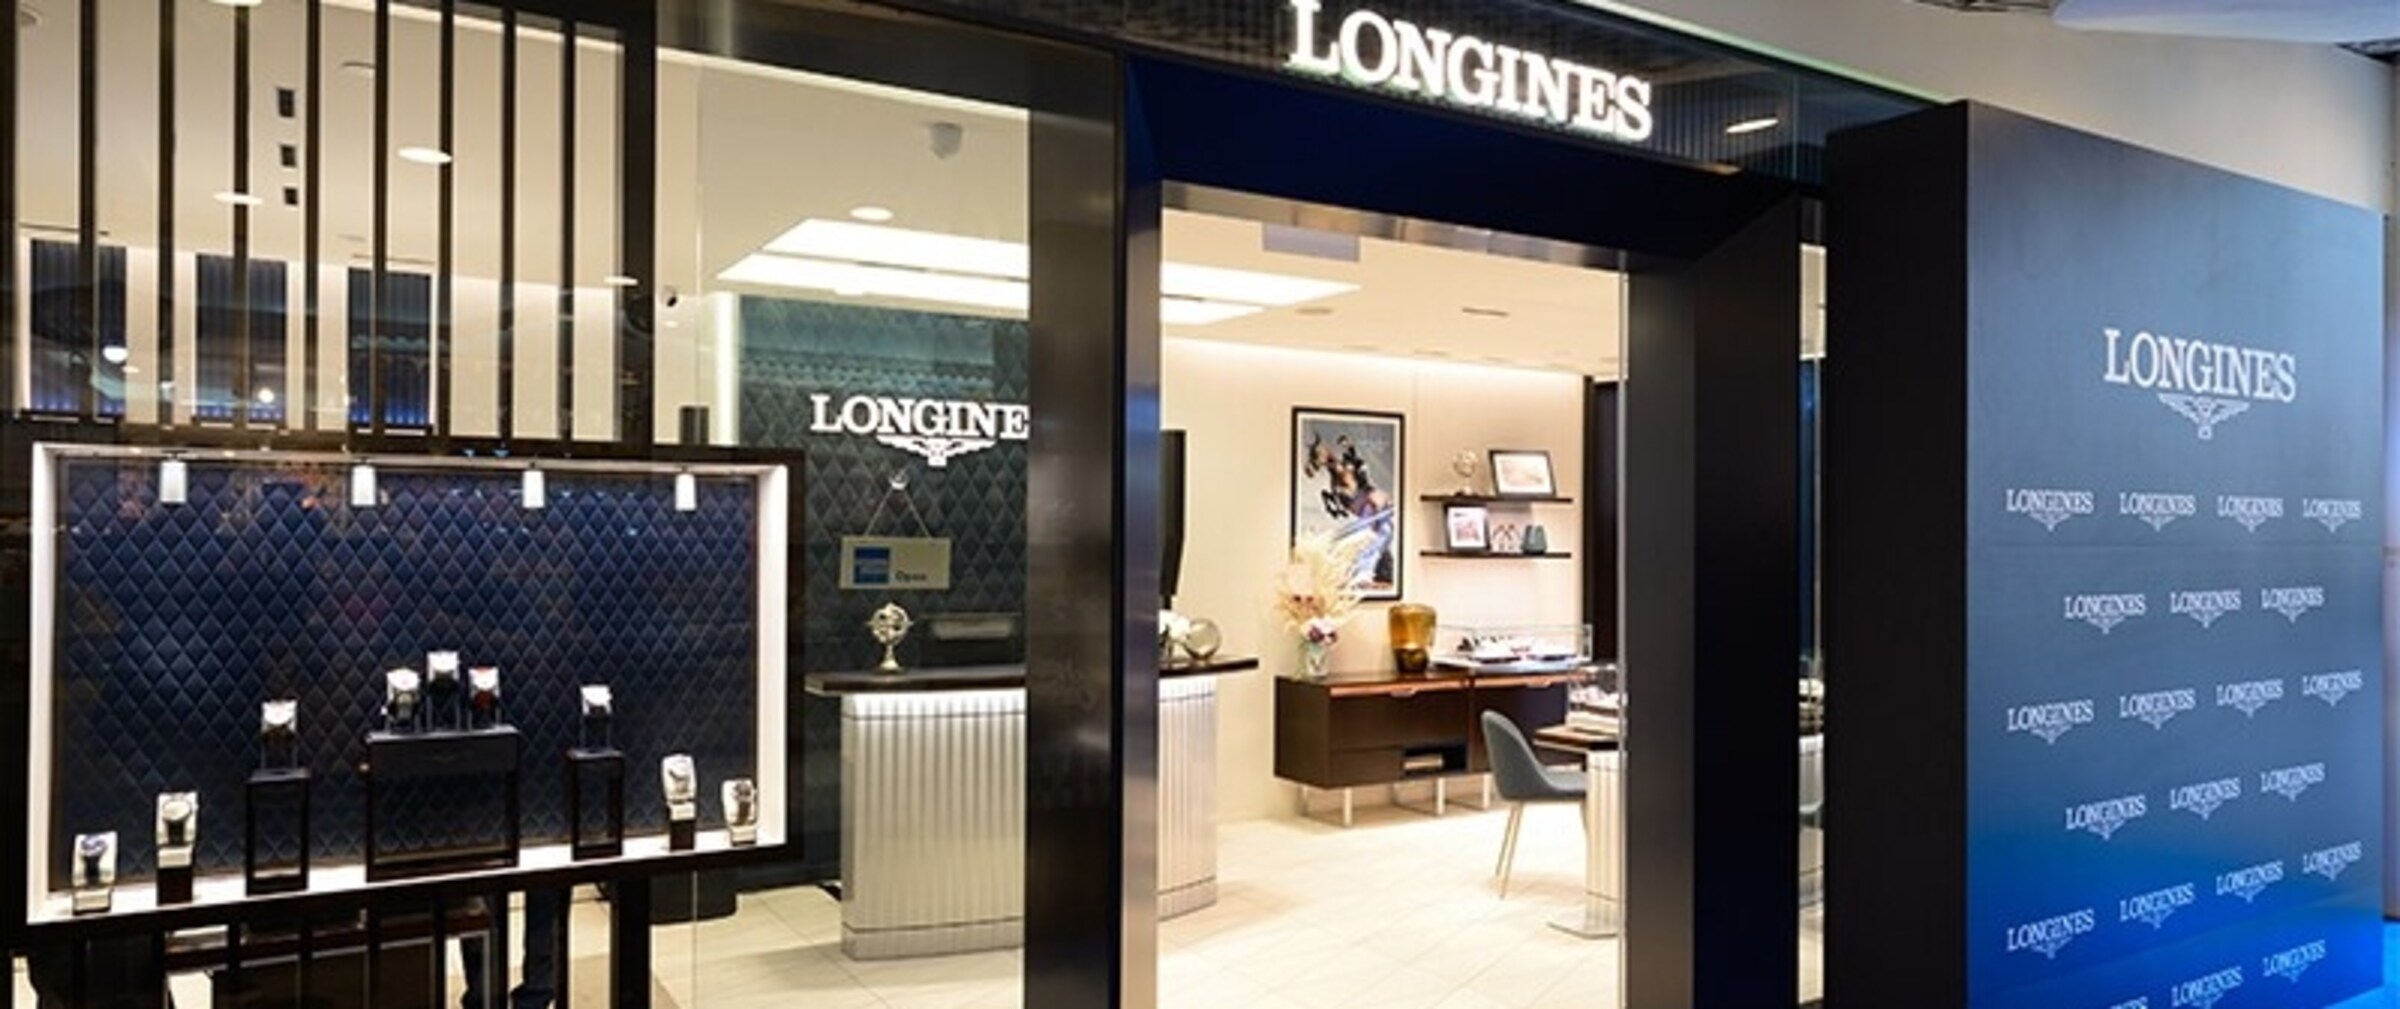 news-longines-rolls-out-new-boutique-concept-at-bugis-junction-store-800x500